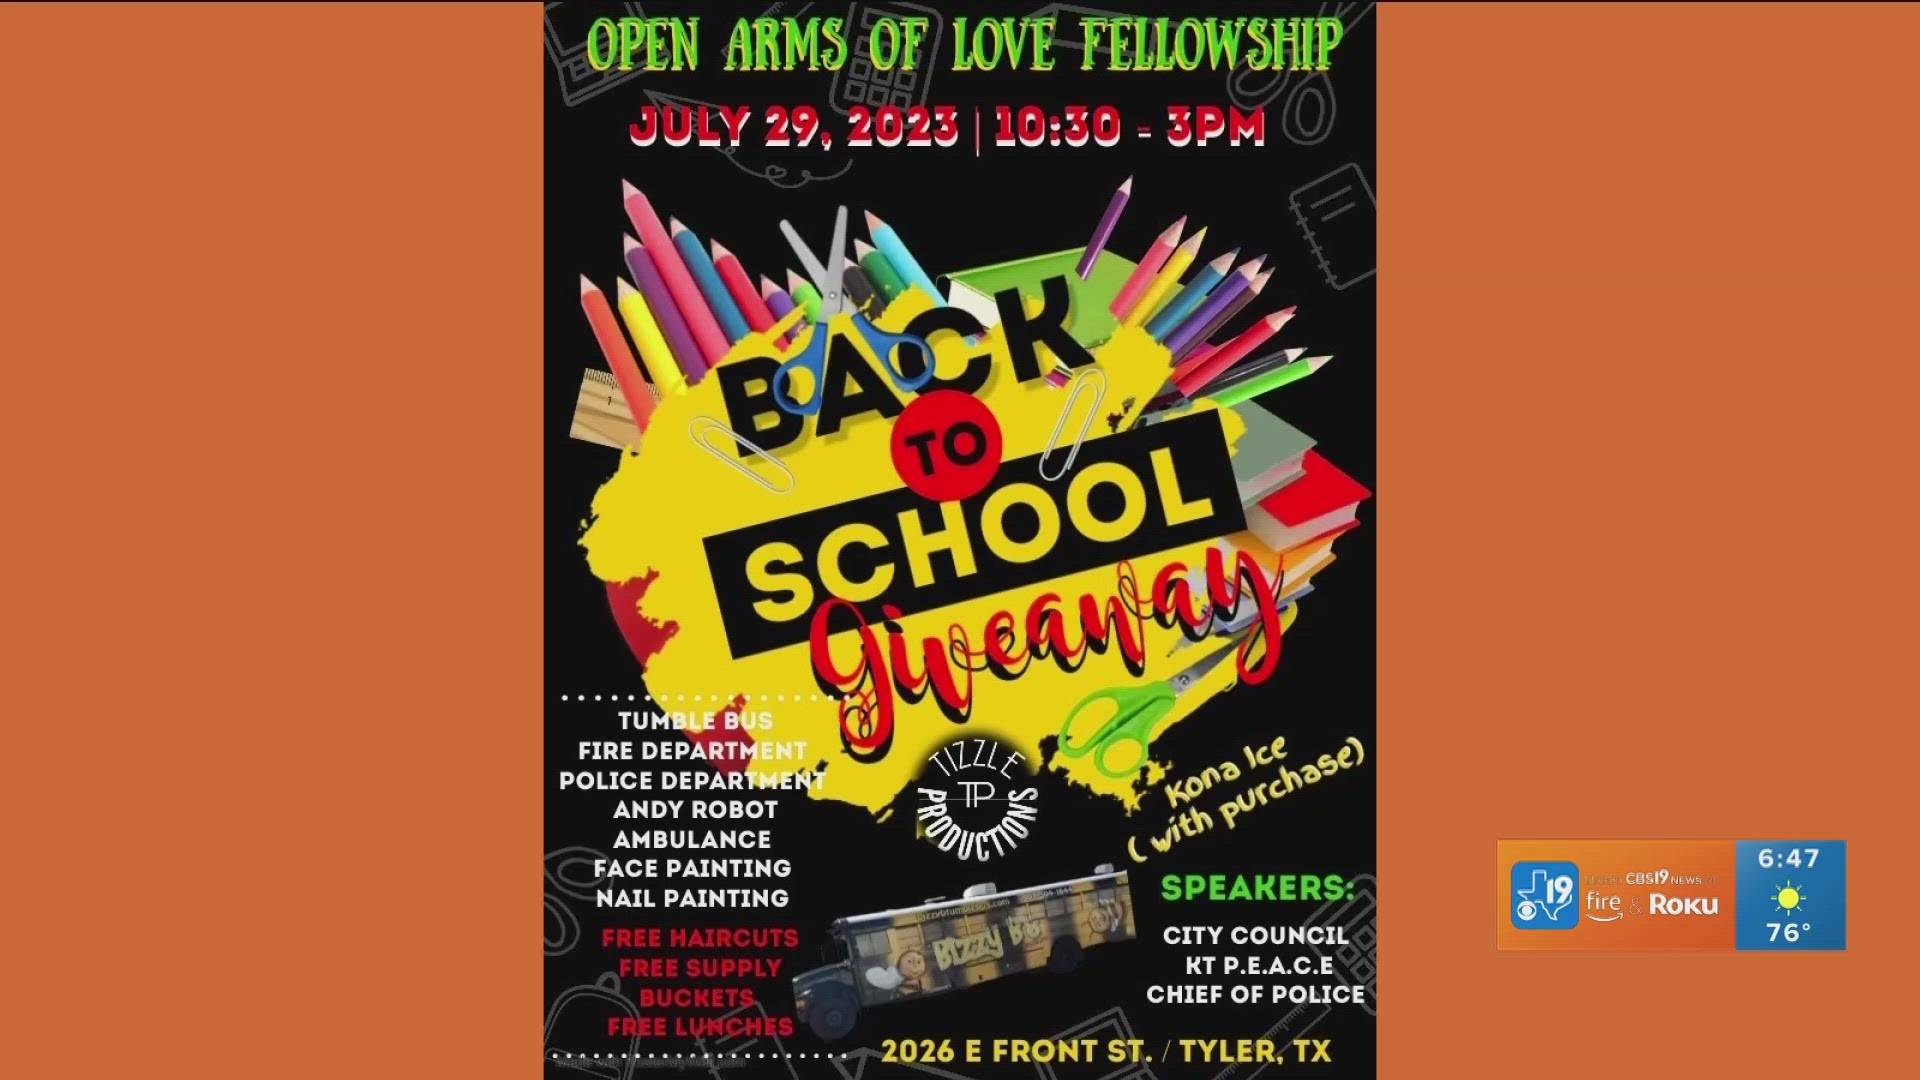 The event will feature free school supplies, haircuts and more!